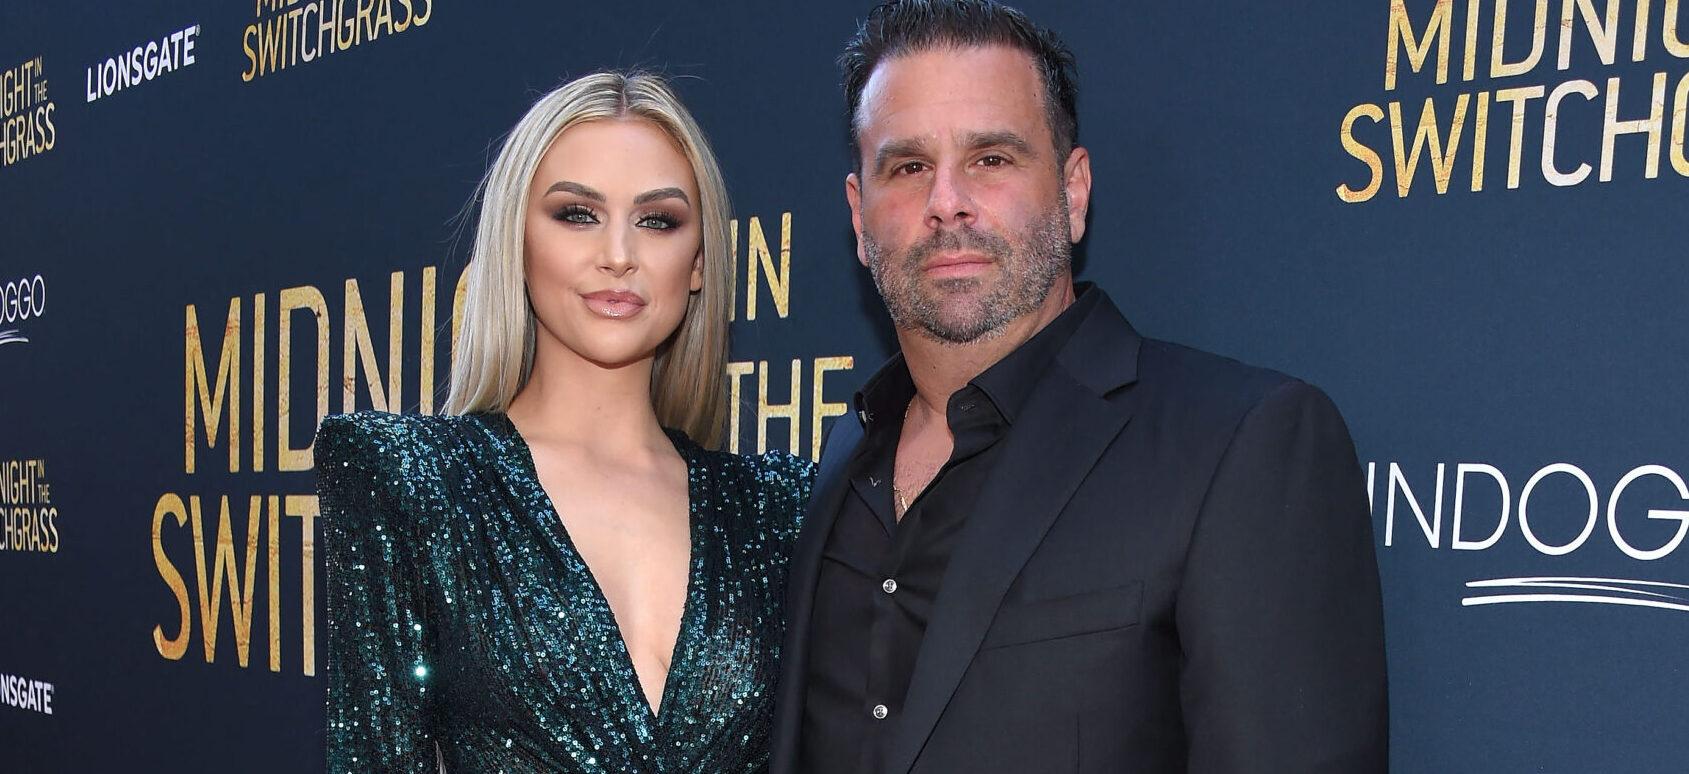 Lala Kent Laments ‘Broken’ Family Court System While Hinting At Custody Battle